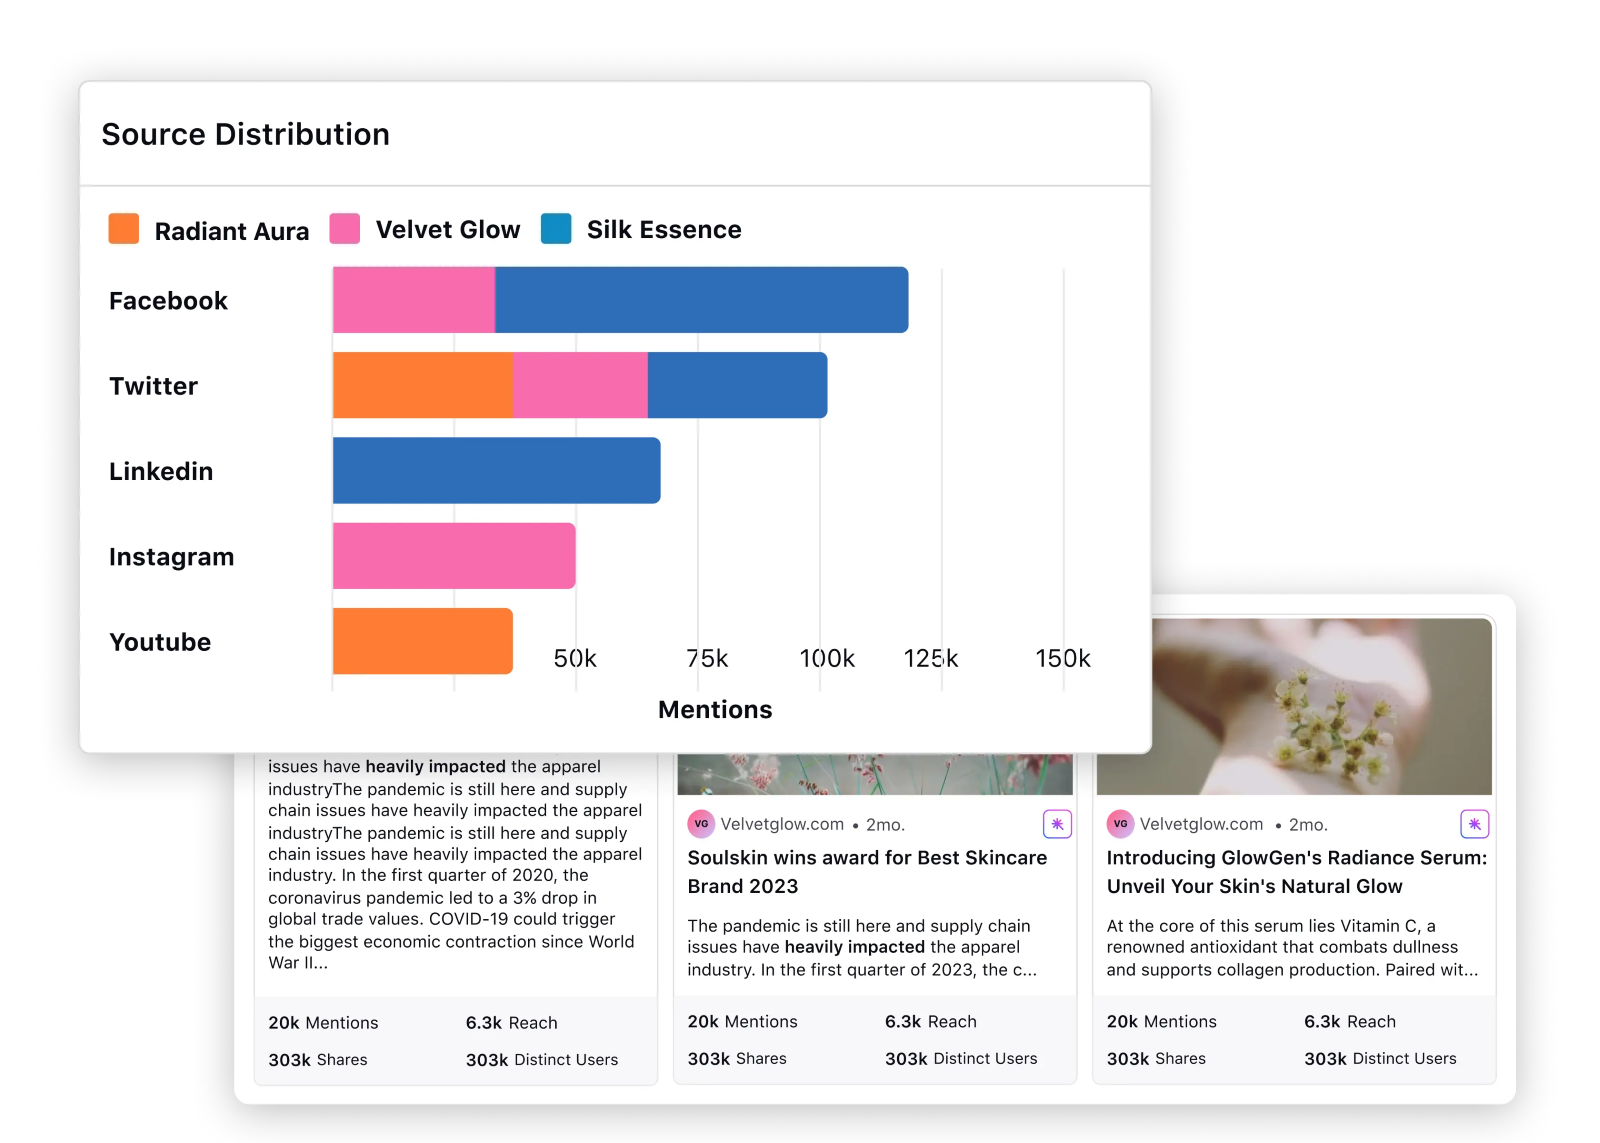 Sprinklr-s competitive benchmarking tool showcasing source distribution details